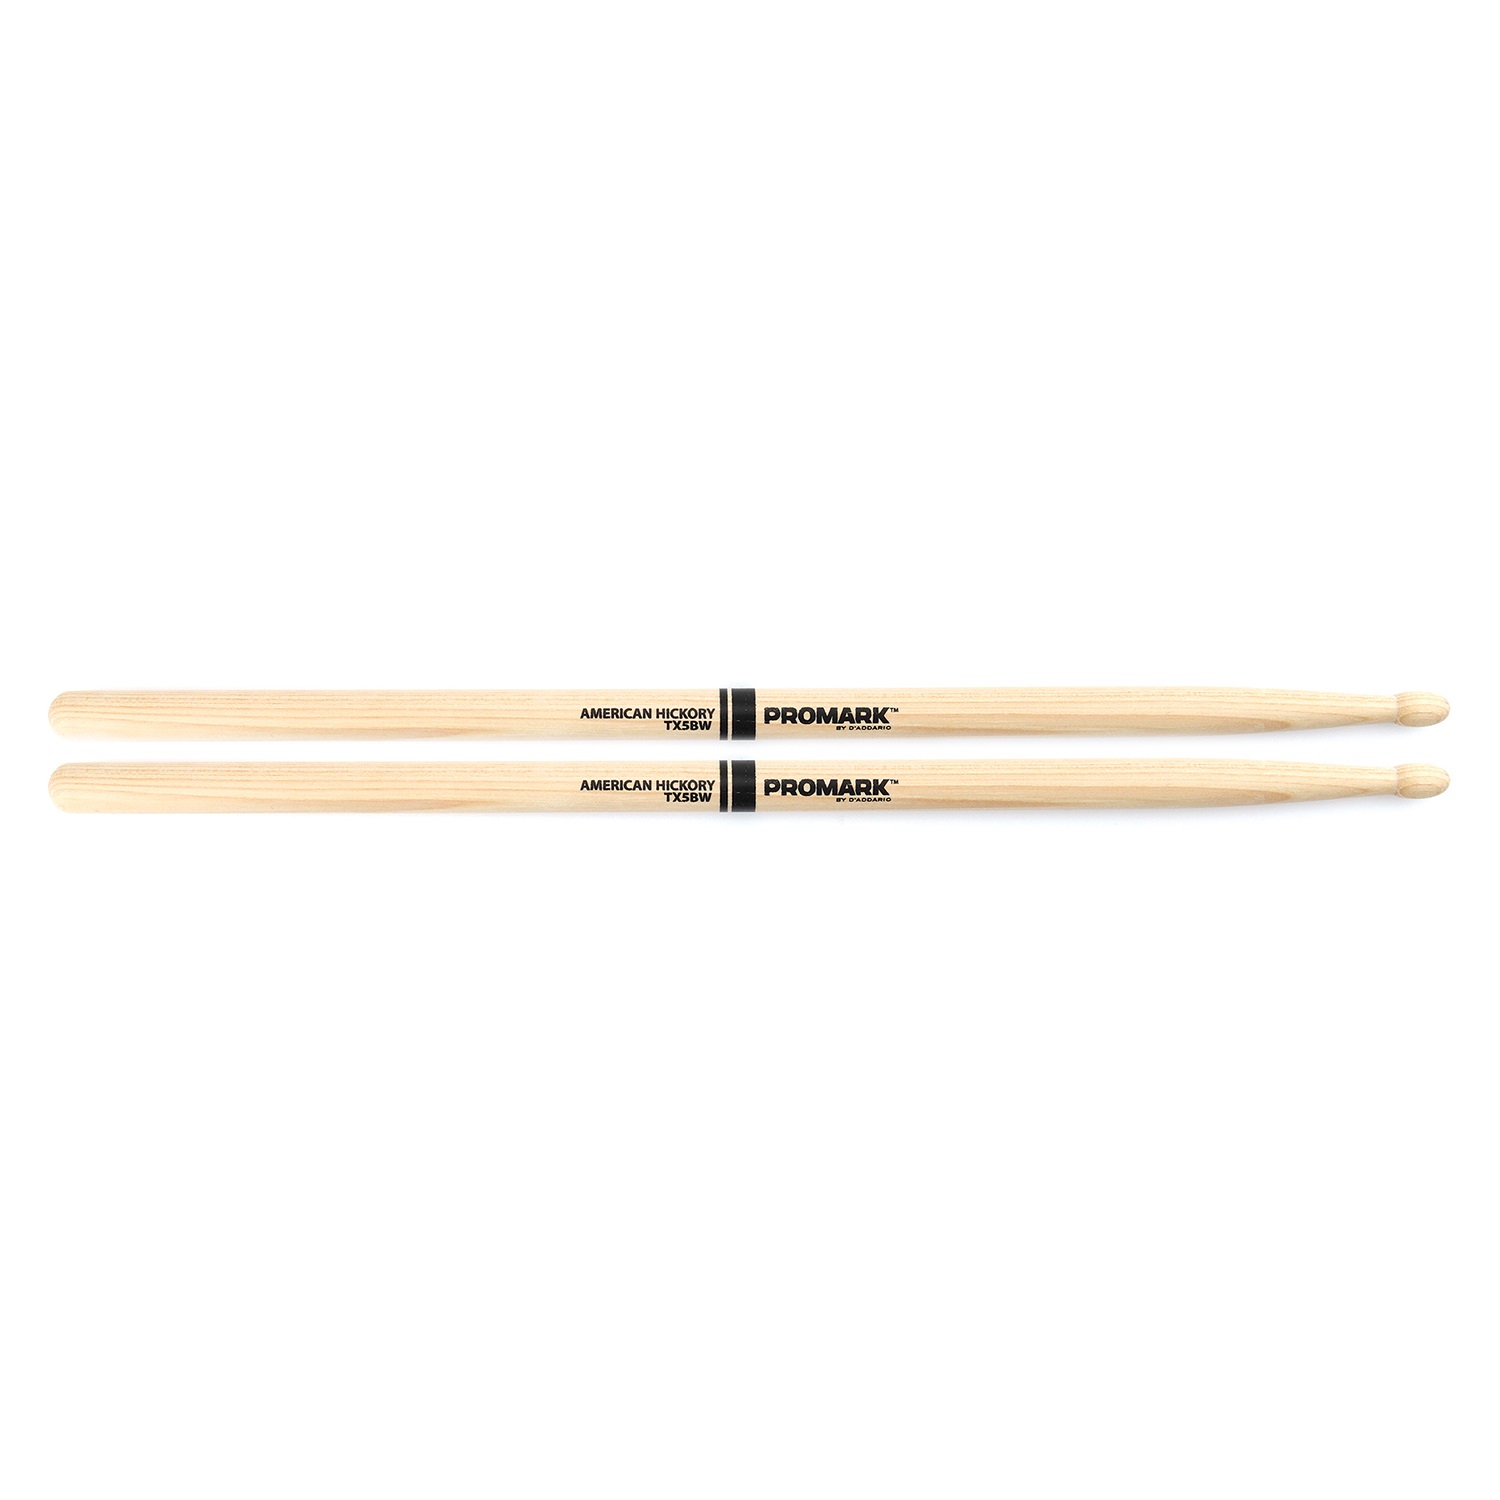 An image of Promark Hickory 5B Wood Tip Drumstick Pair - Gift for a Drummer | PMT Online